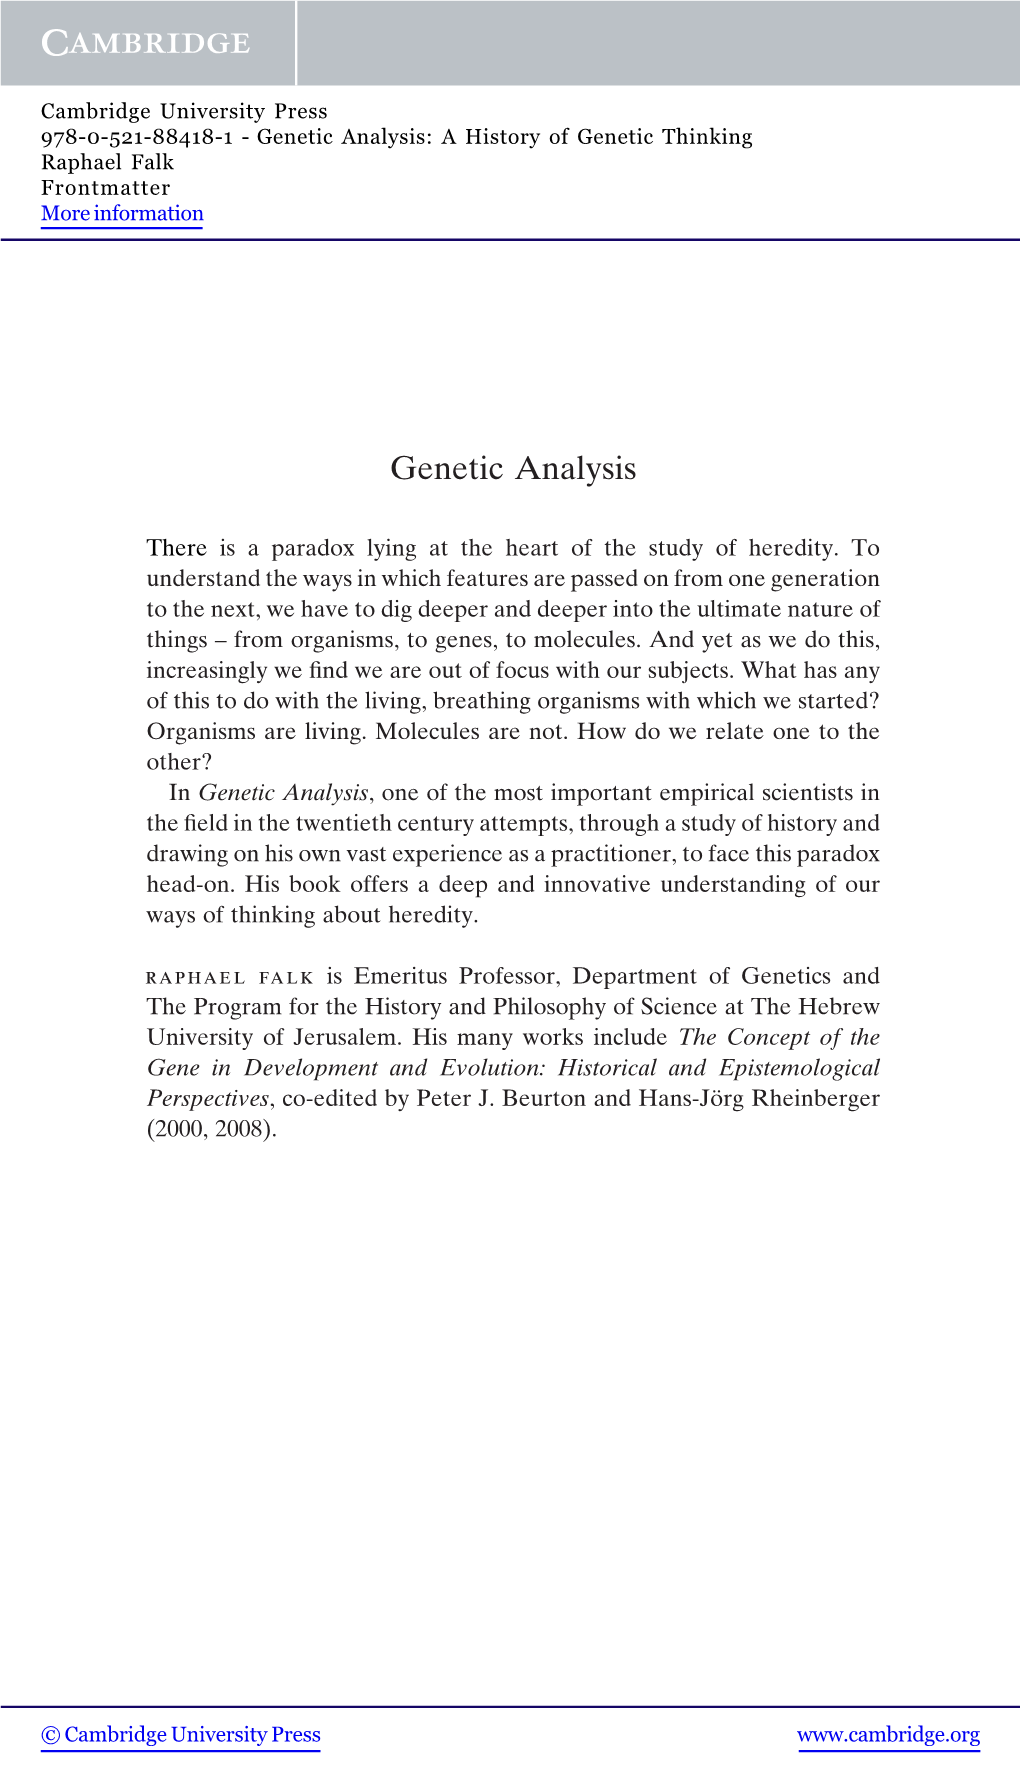 Genetic Analysis: a History of Genetic Thinking Raphael Falk Frontmatter More Information